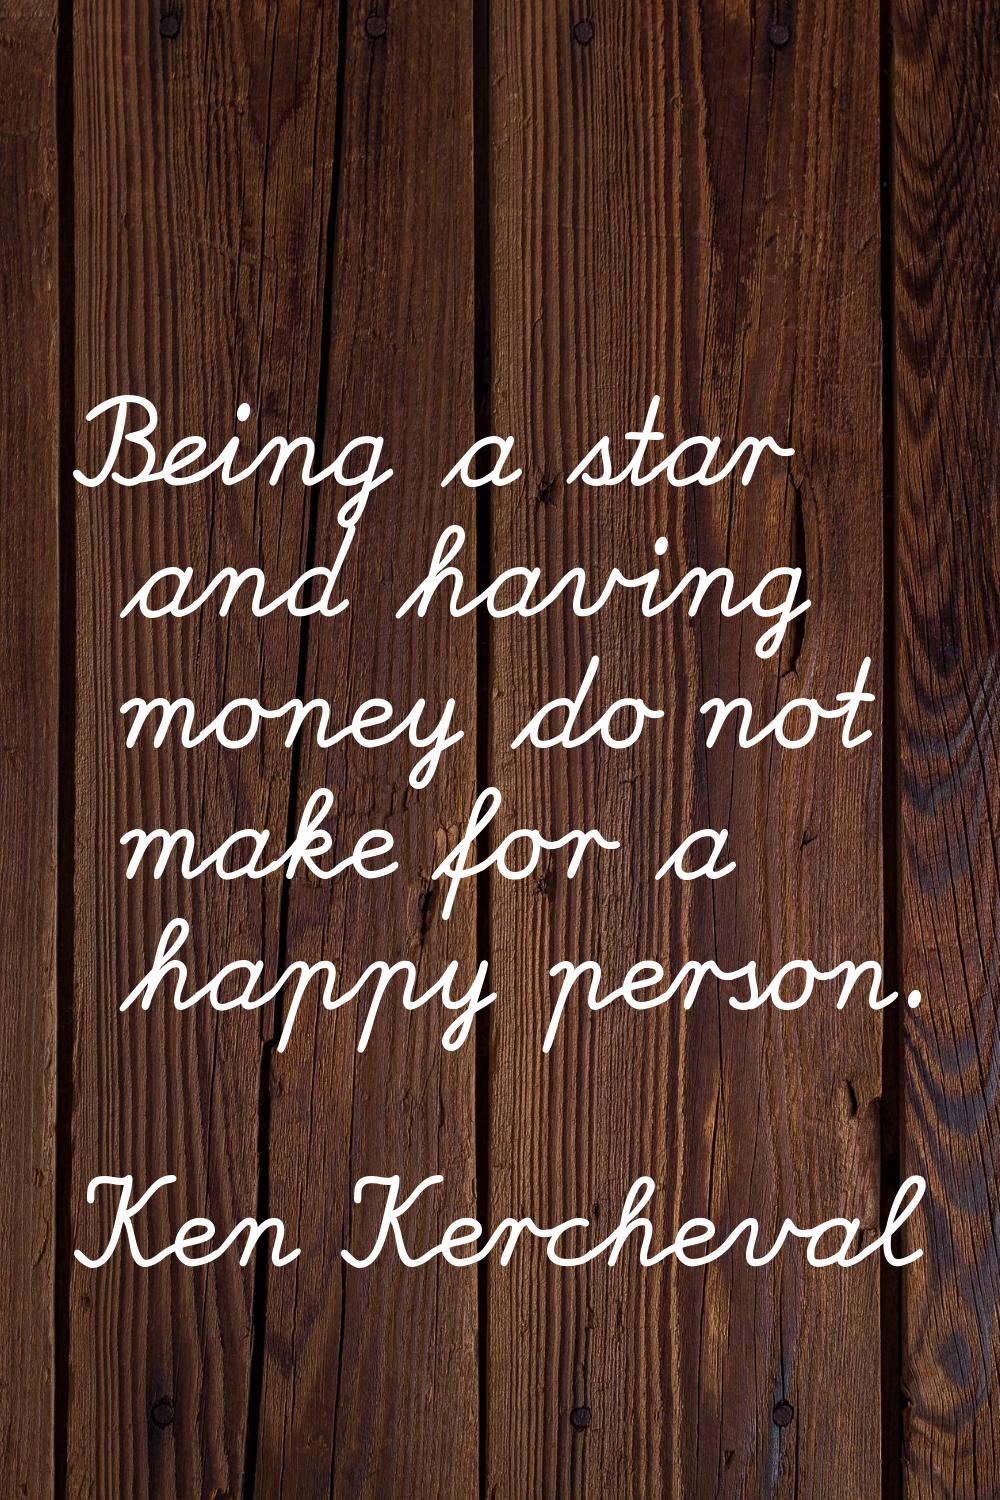 Being a star and having money do not make for a happy person.